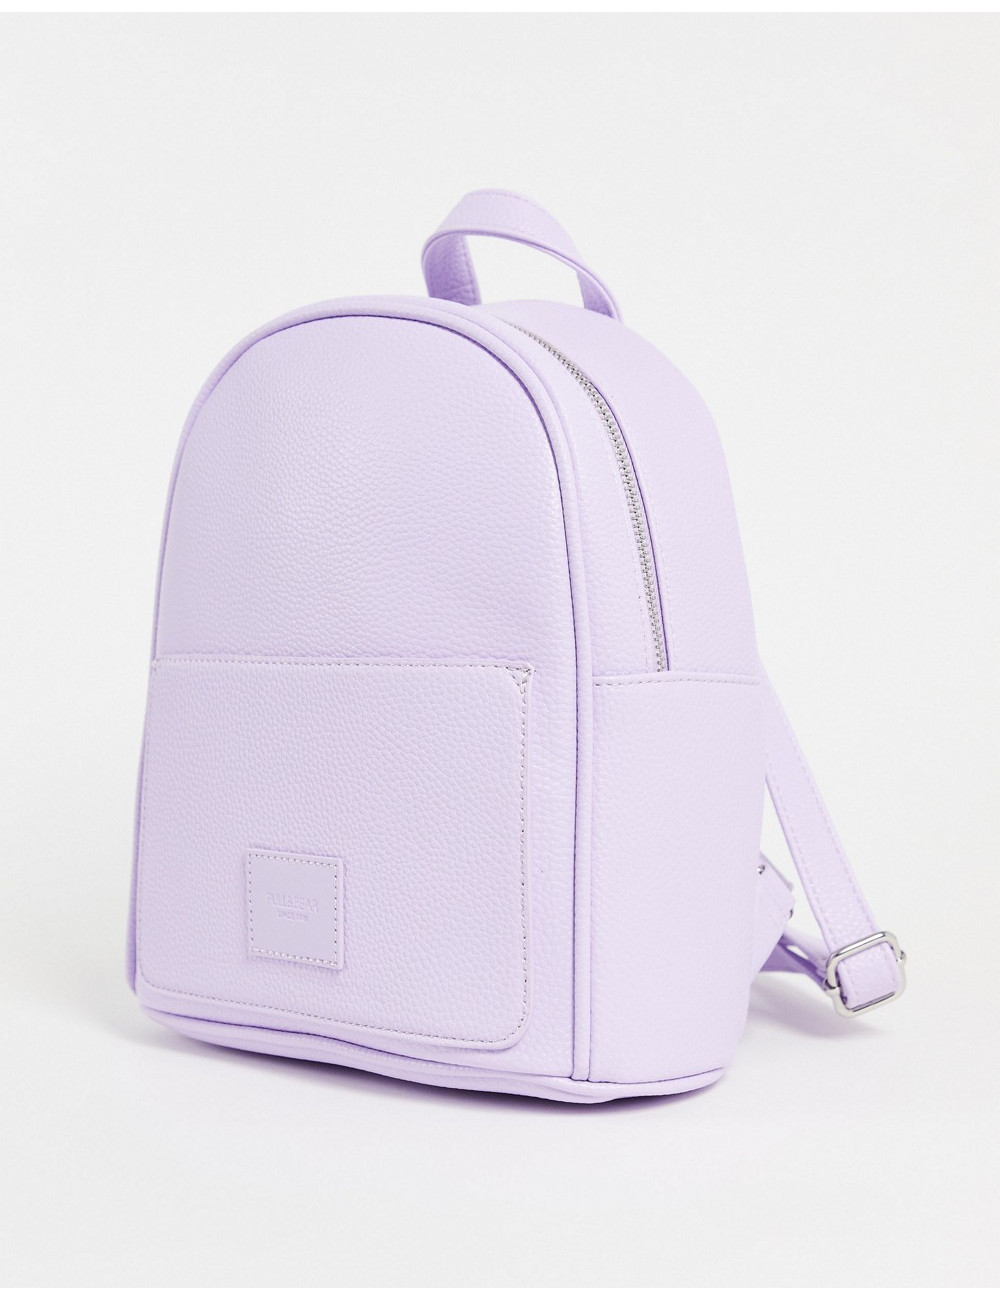 Pull&bear backpack in lilac